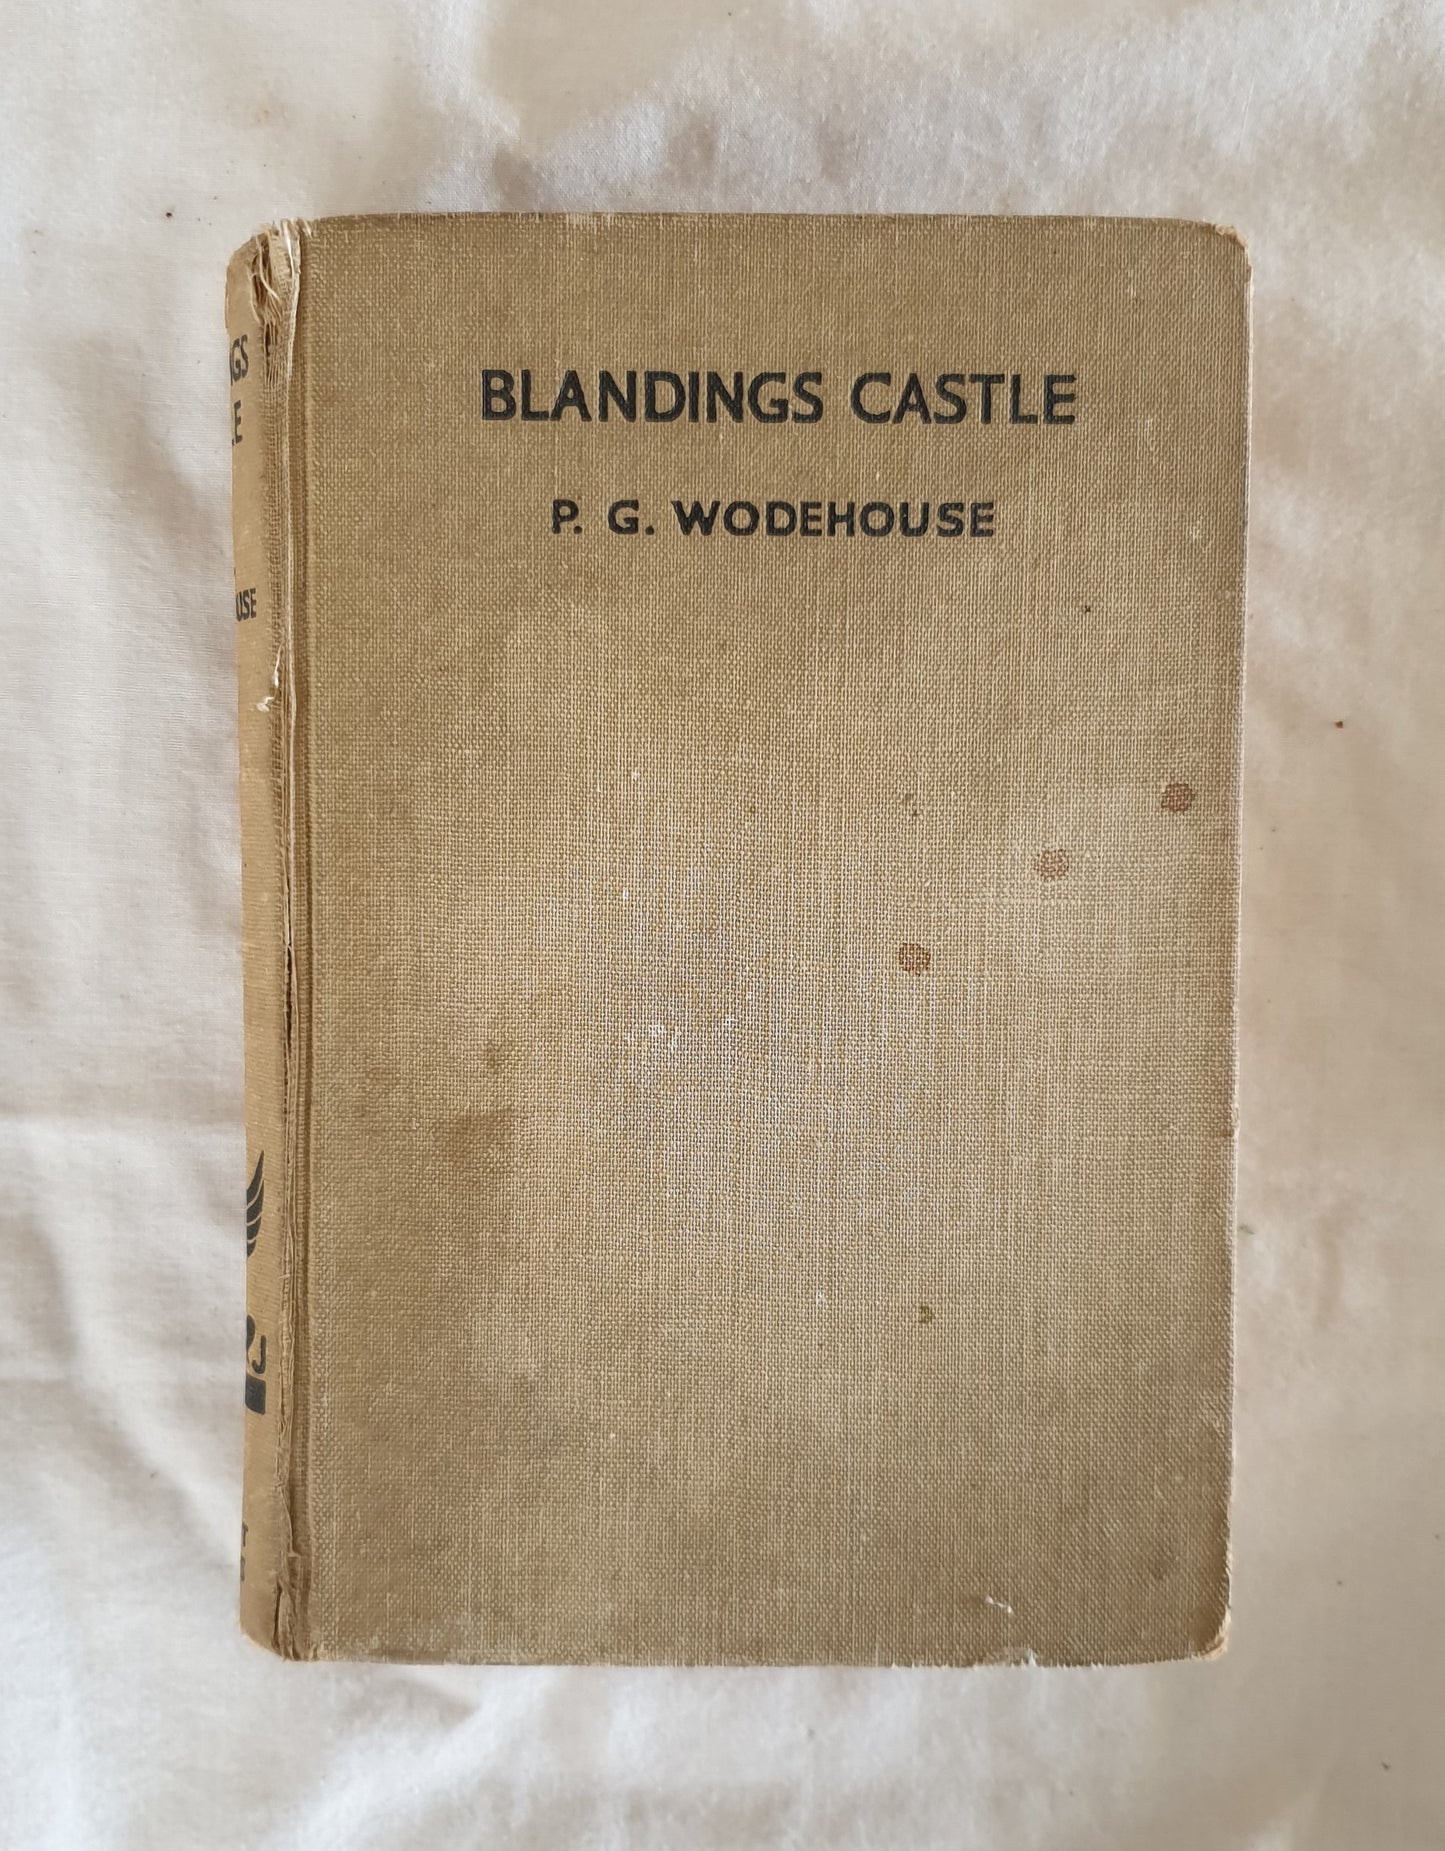 Blandings Castle and Elsewhere by P. G. Wodehouse